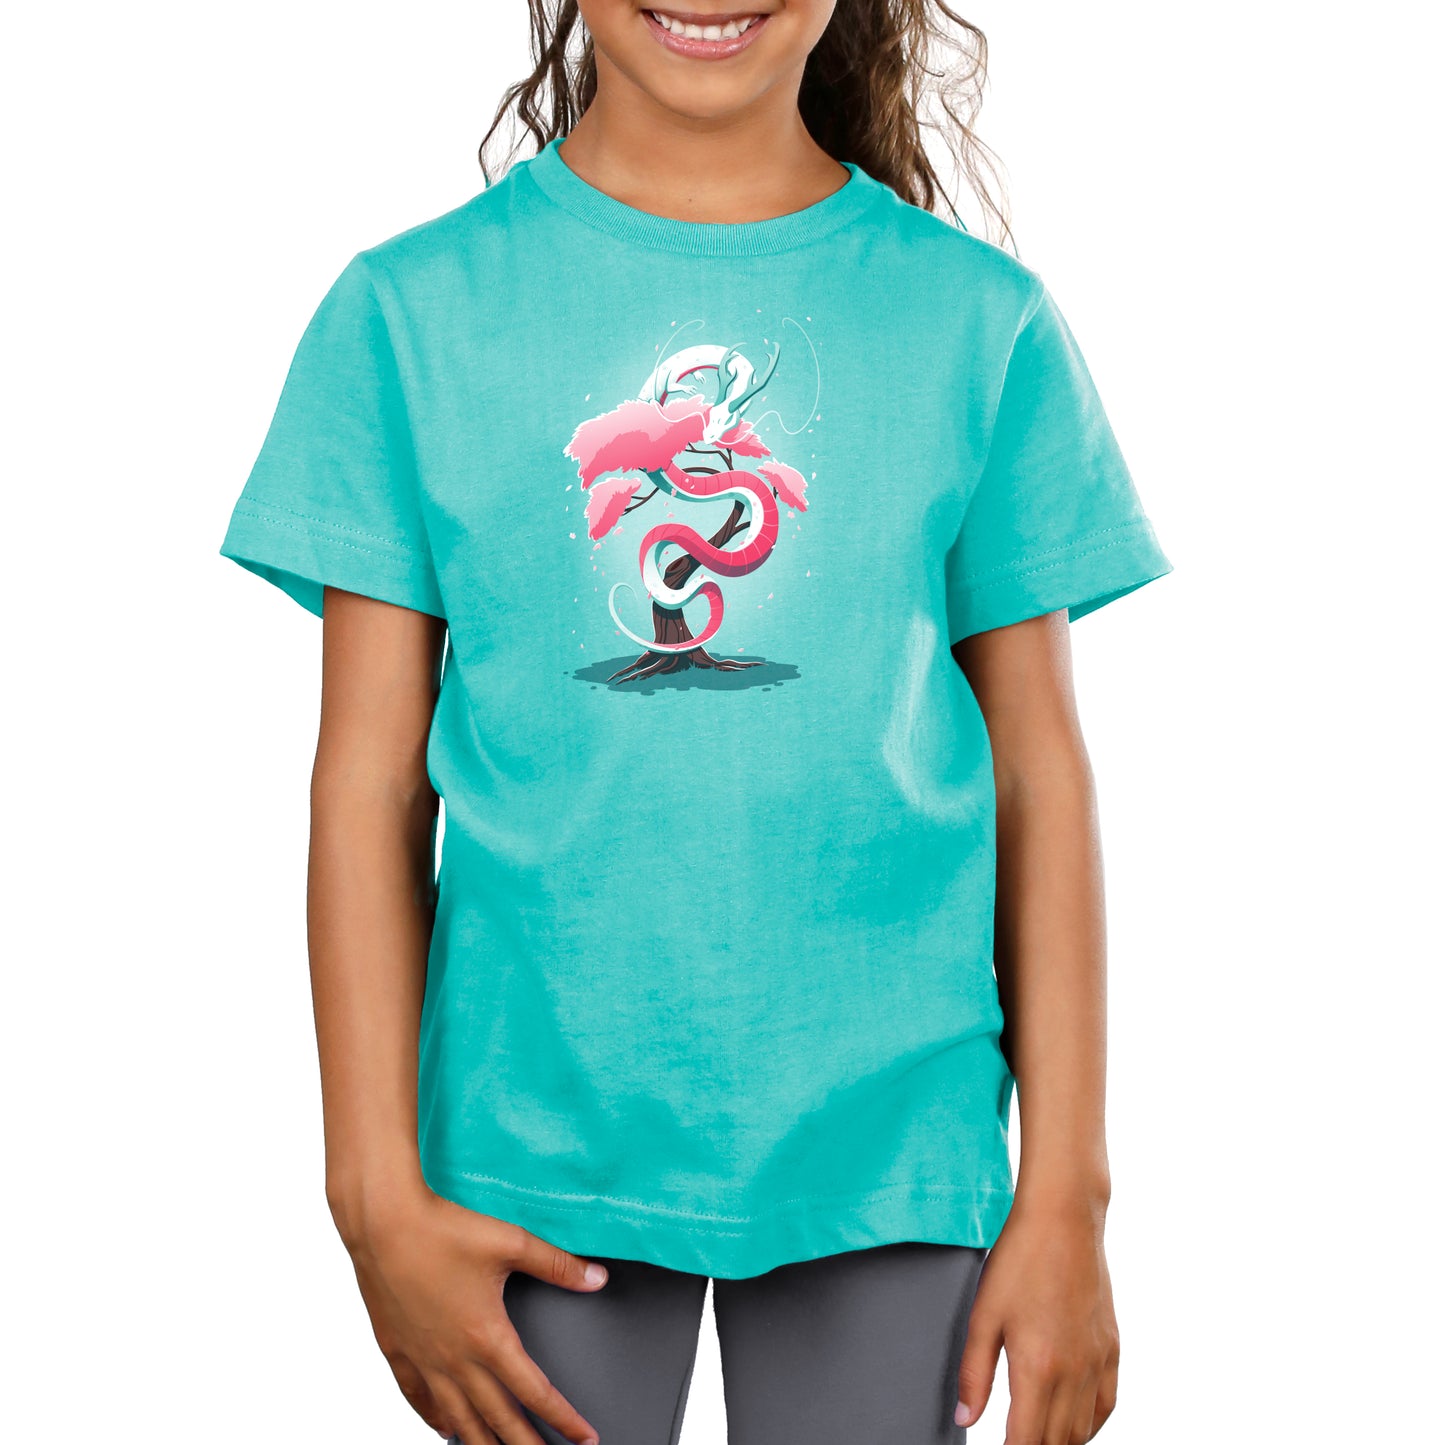 Young girl wearing a Caribbean blue t-shirt featuring the Cherry Blossom Dragon by monsterdigital, winding gracefully around a pink tree.